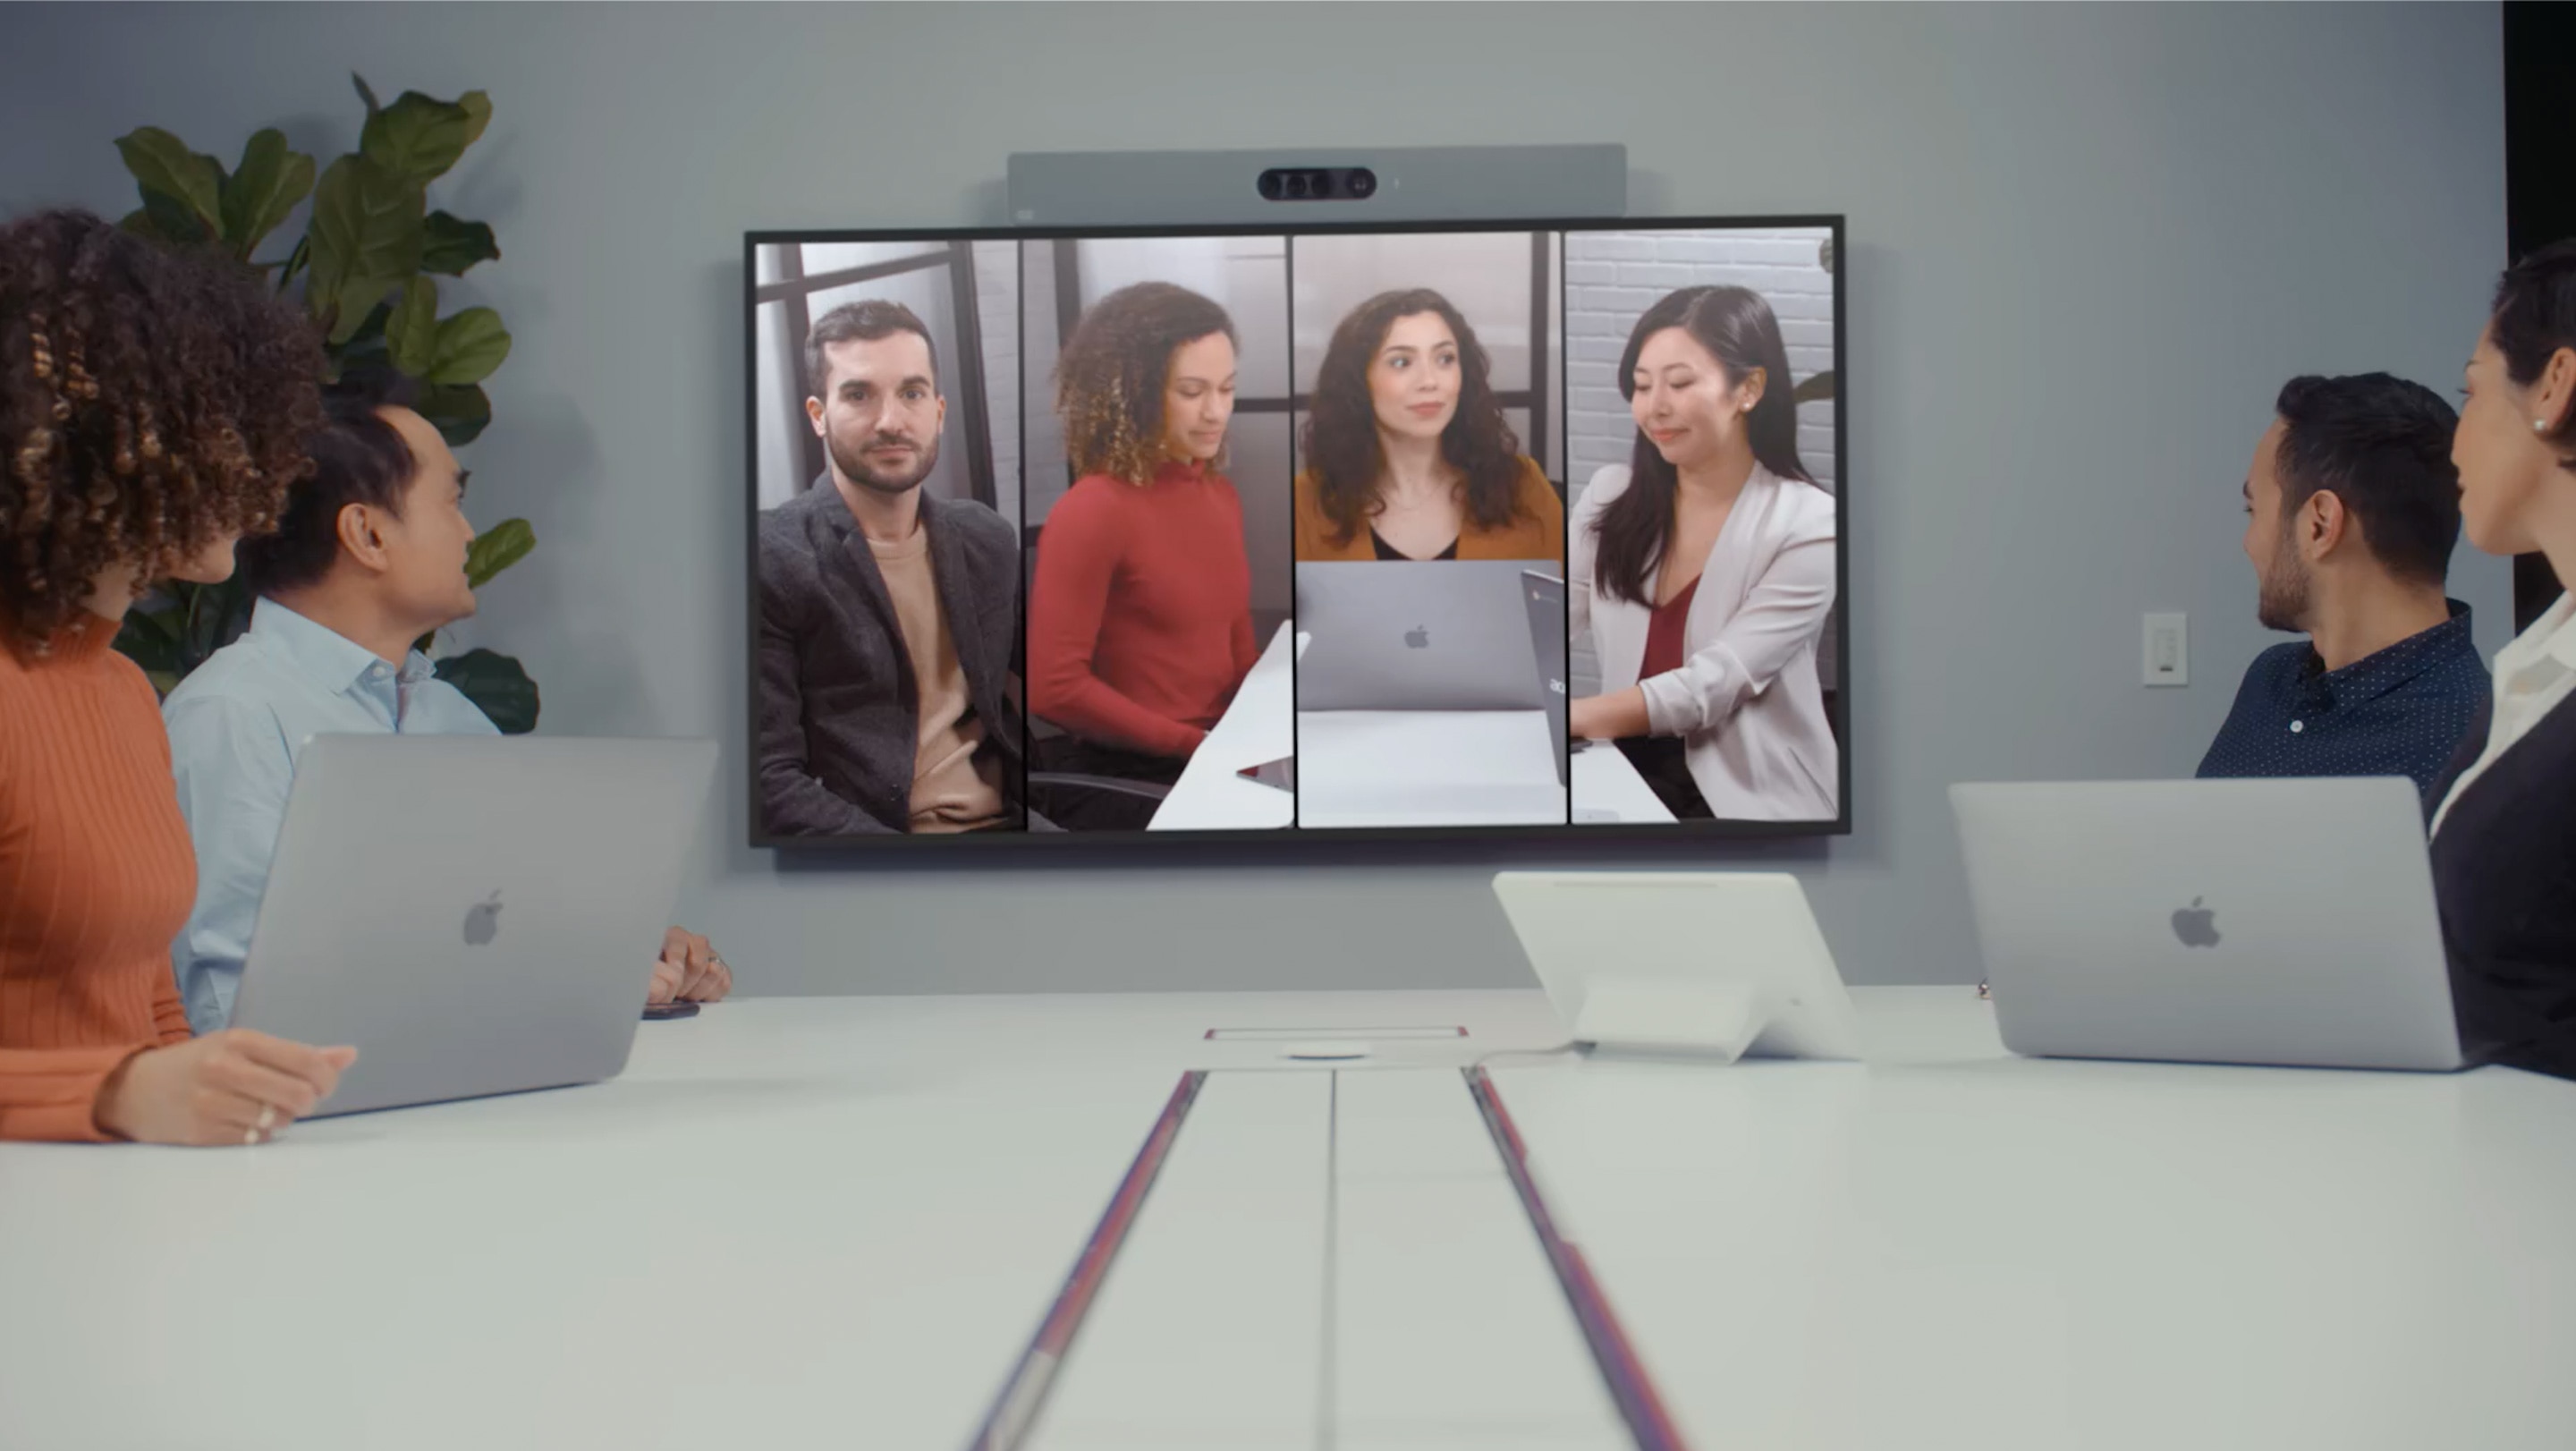 A large display with the Quad Camera Bar mounted to the top shows employees in Frames view during a video conference, while in-person team looks on in a conference room.